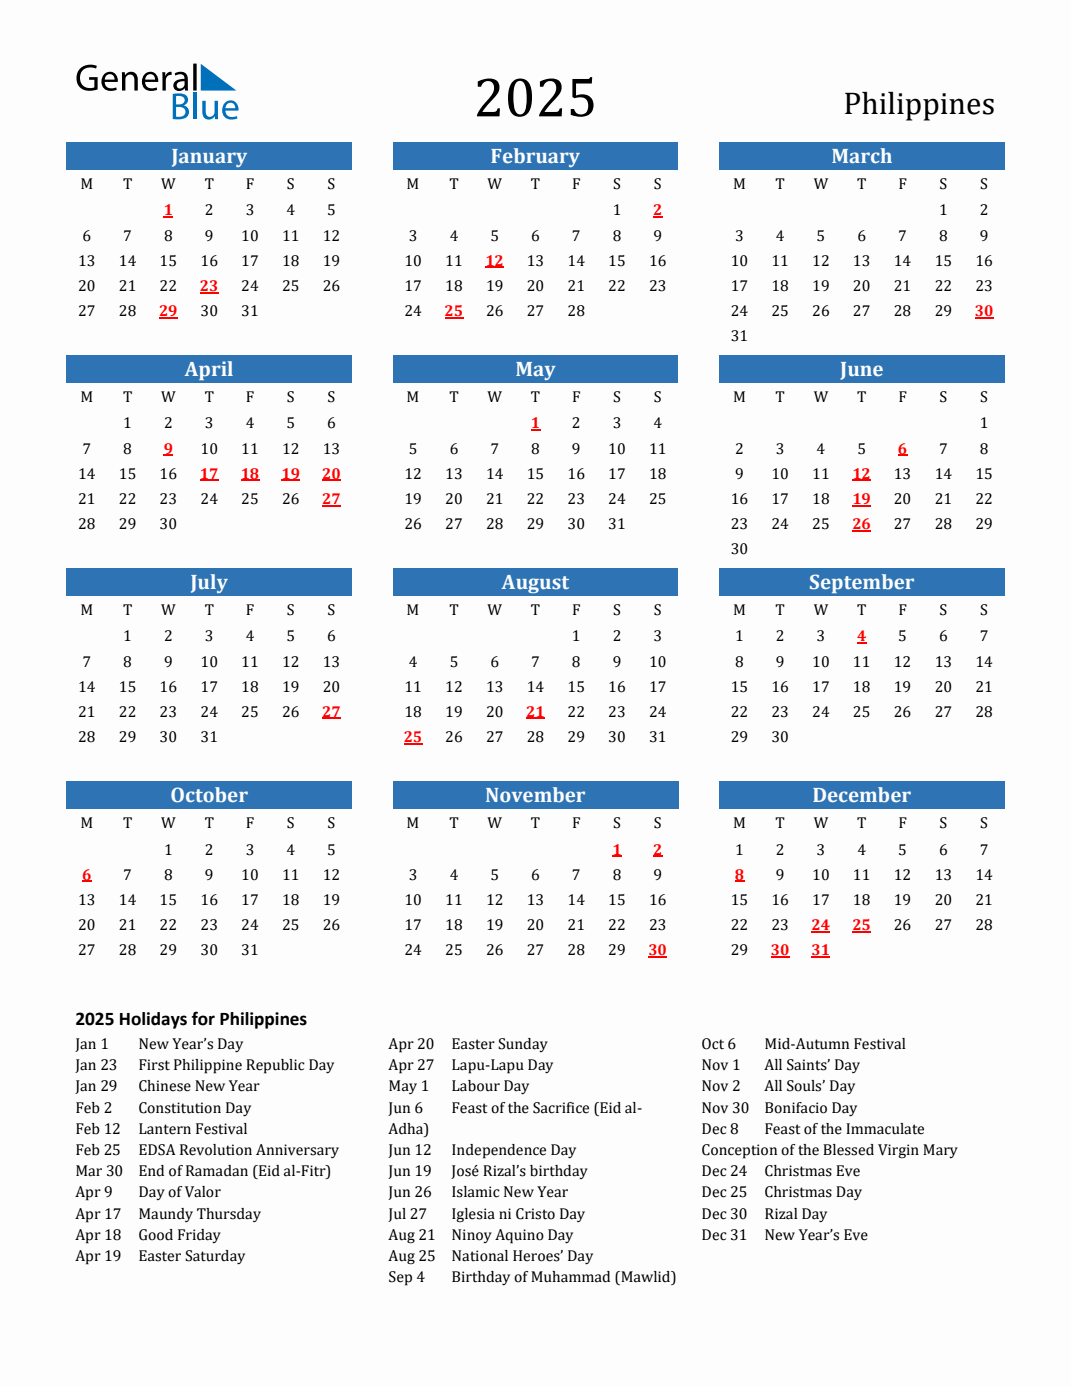 2025 Holiday Calendar for Philippines Monday Start